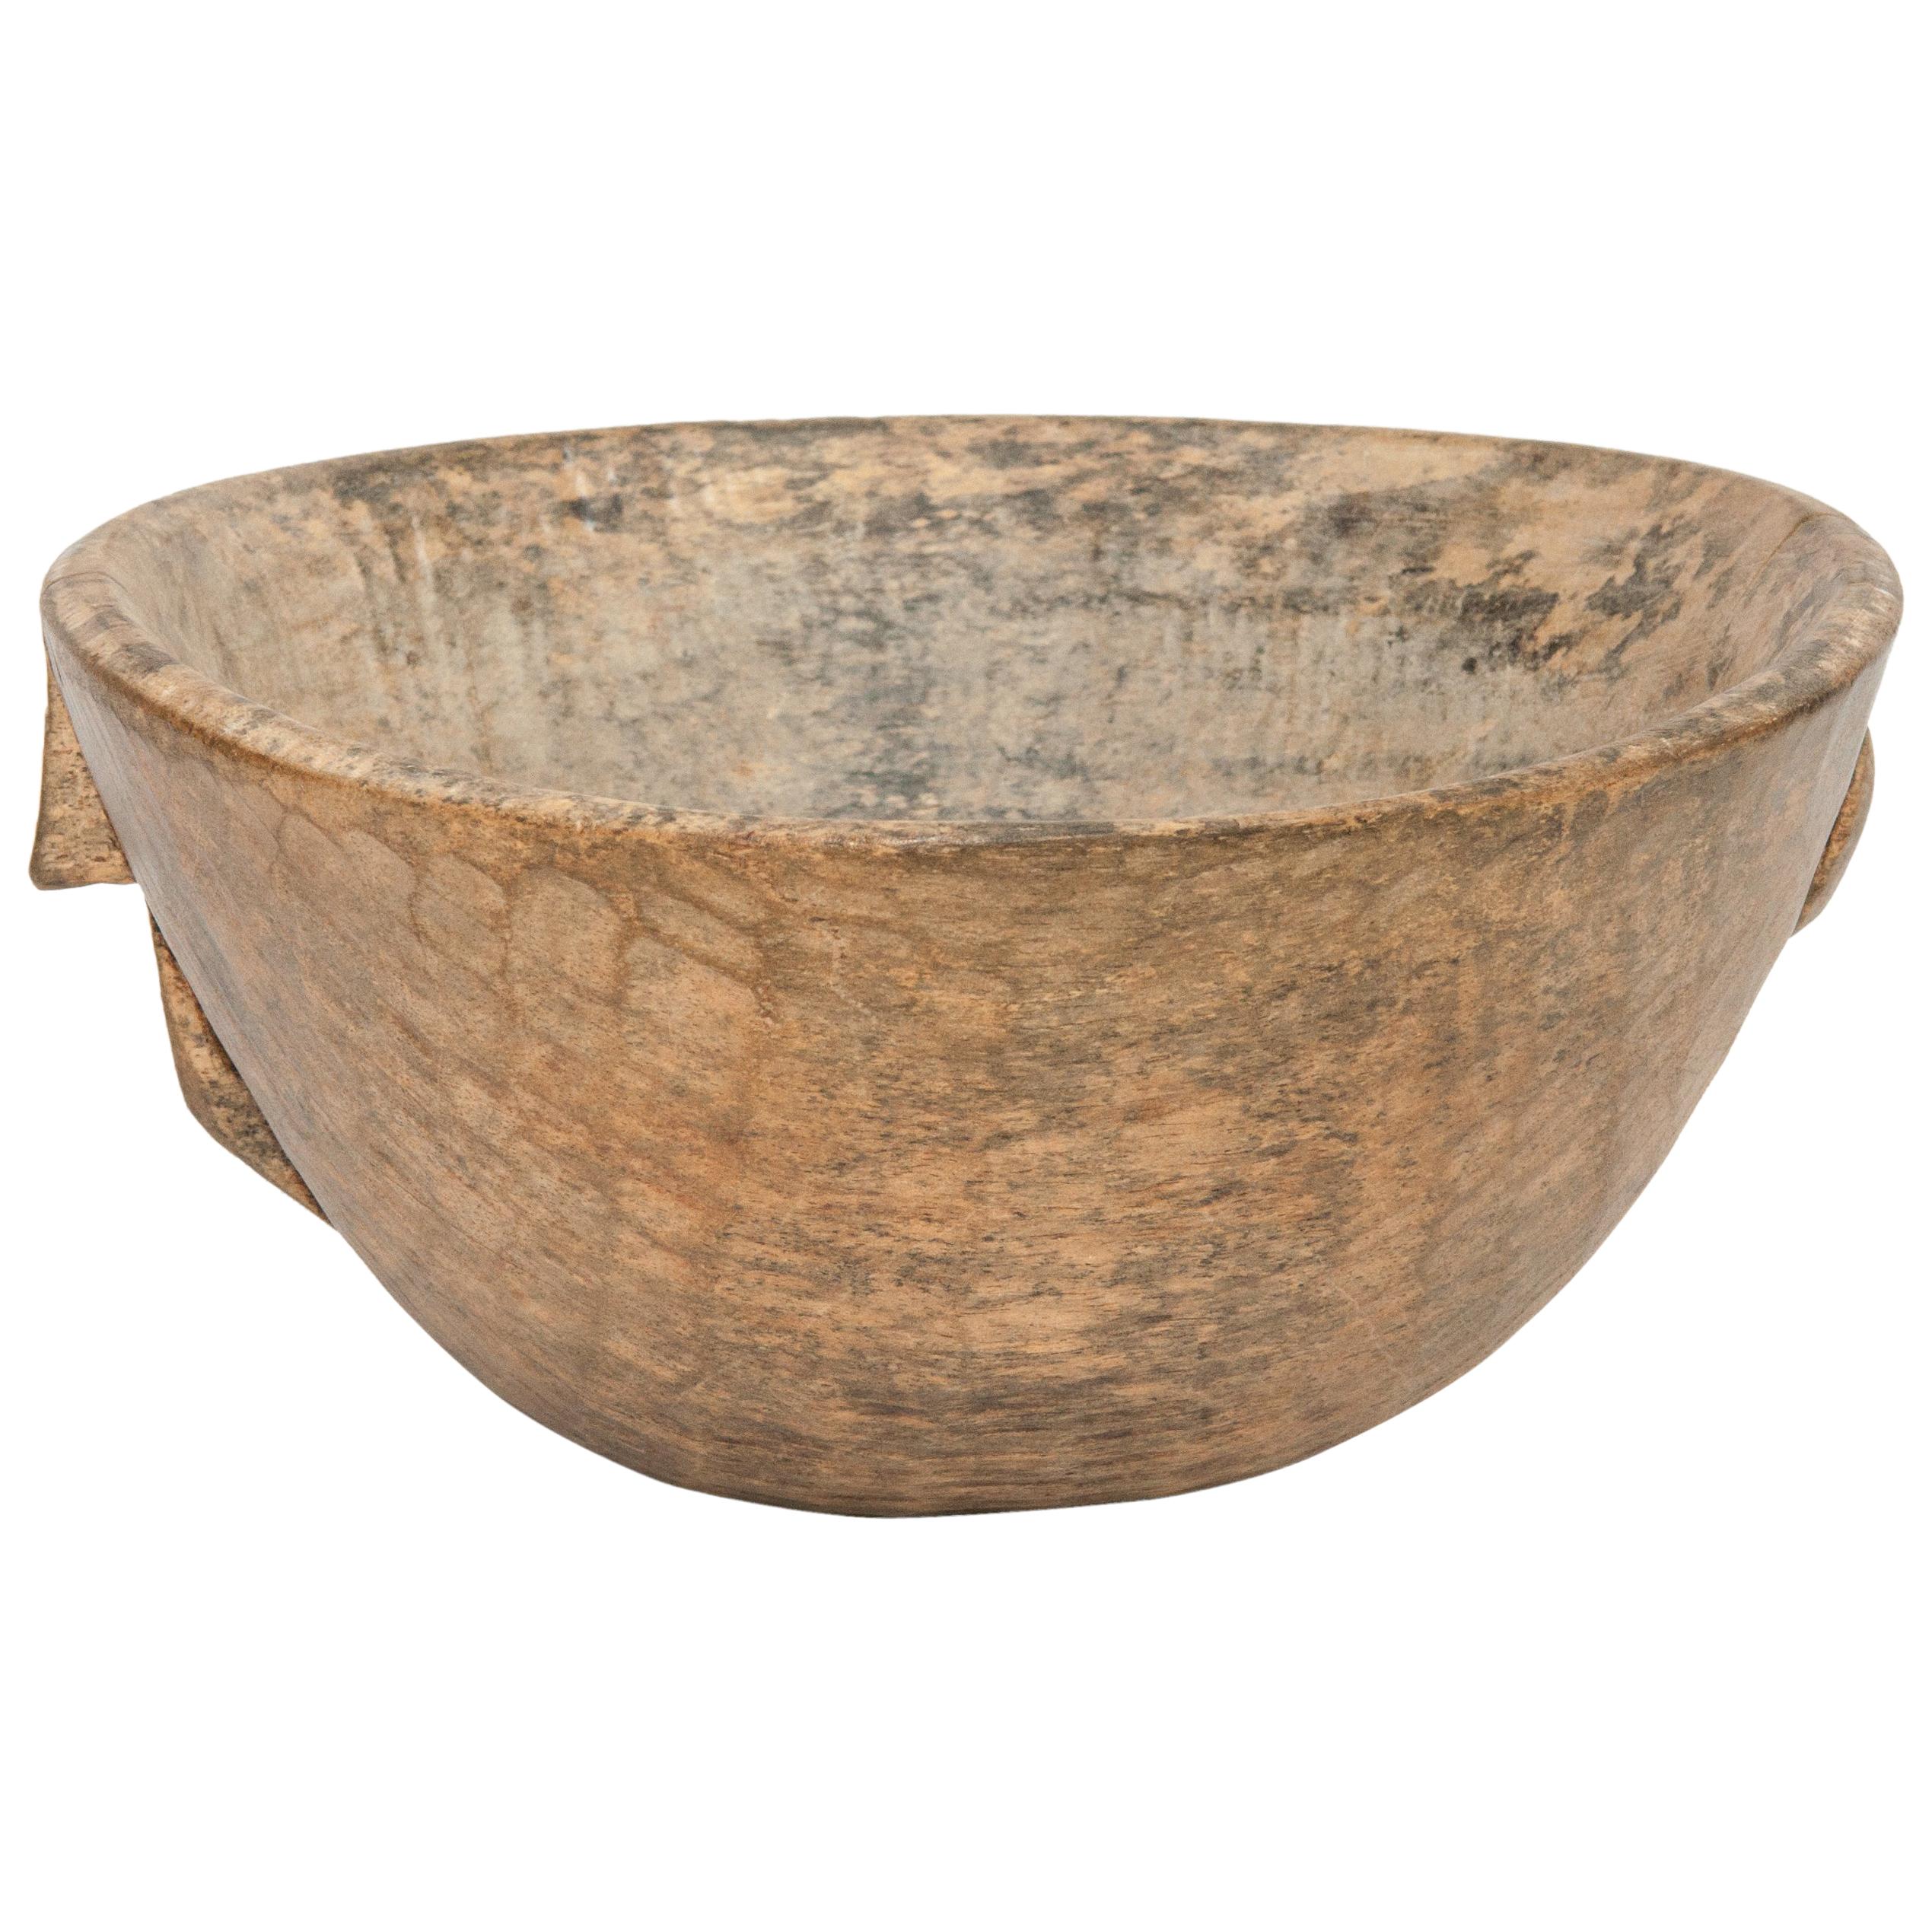 Tribal Light Colored, Spalted Wooden Bowl, Fulani of Niger, Mid-20th Century